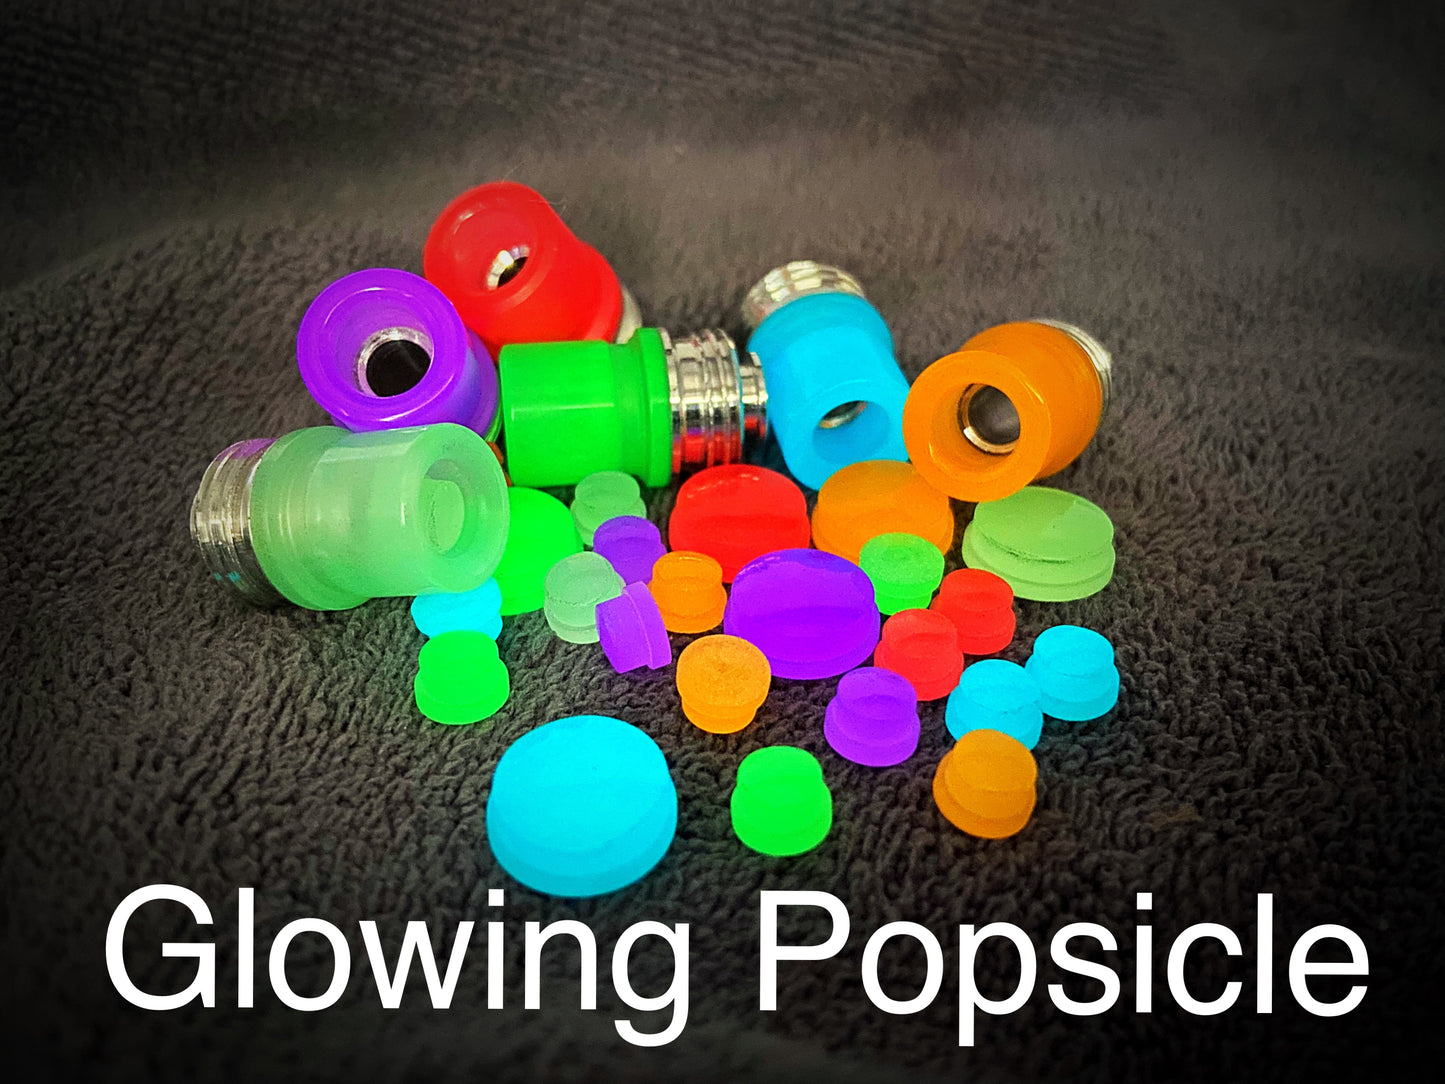 BMM Lathe Turned Accessories - Glowing Popsicle